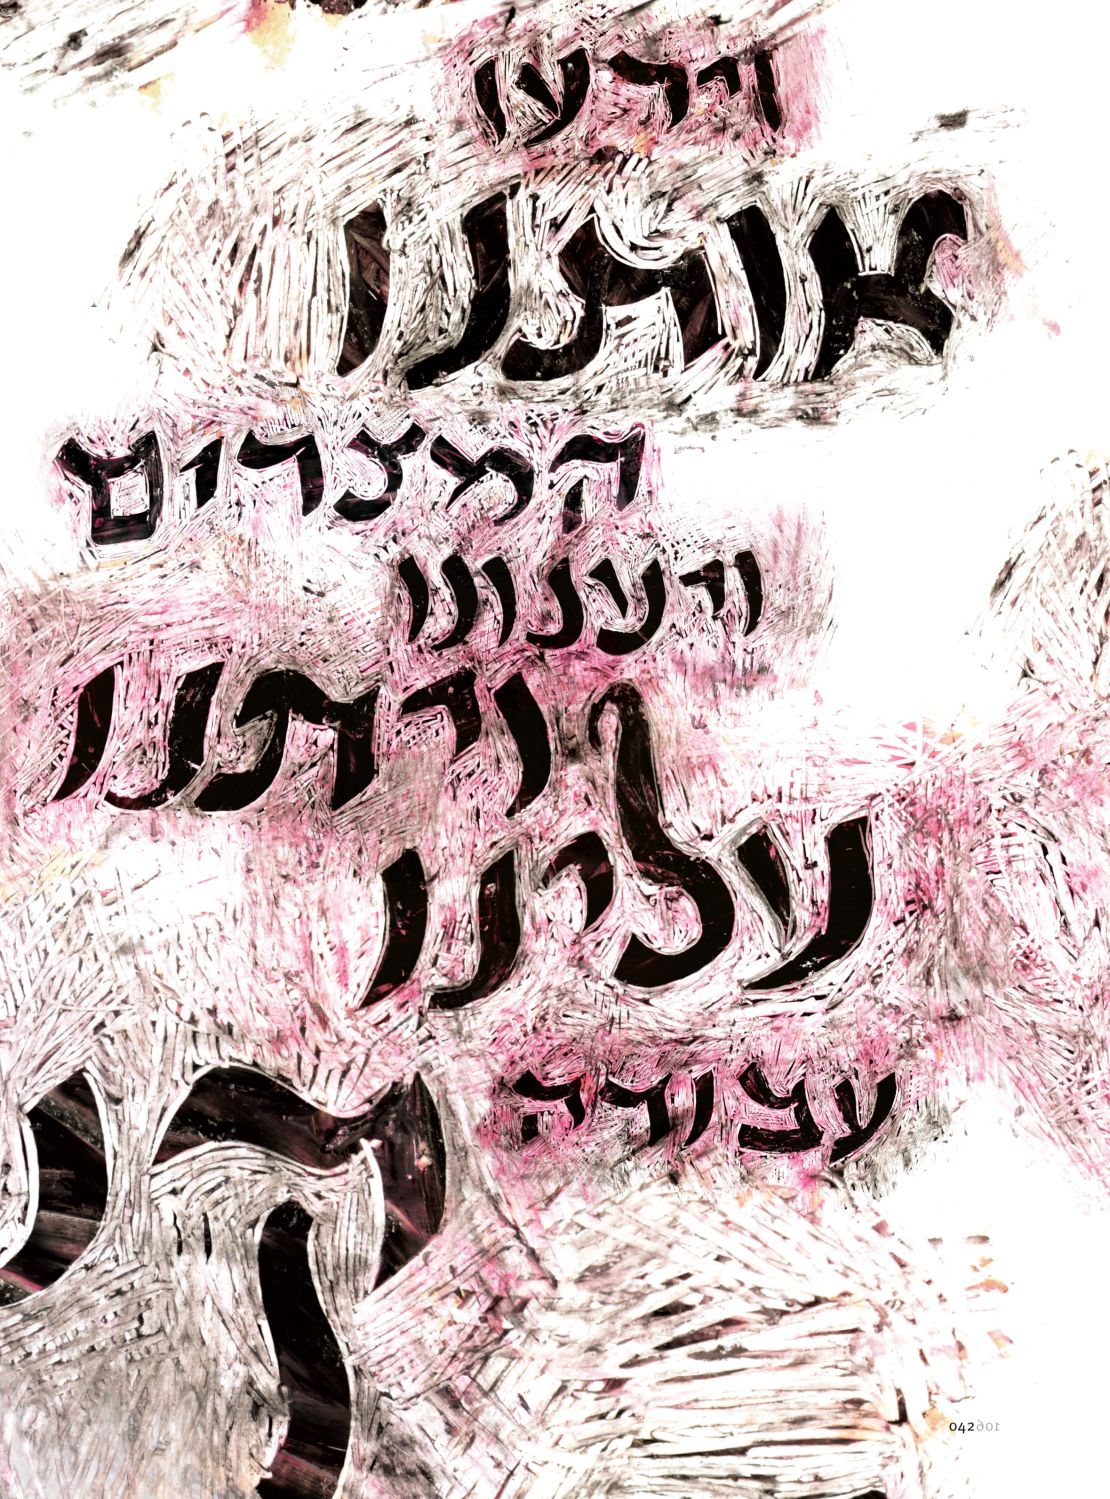 The "New American Haggadah" features colorful, abstract designs with Hebrew letters by artist Oded Ezer.